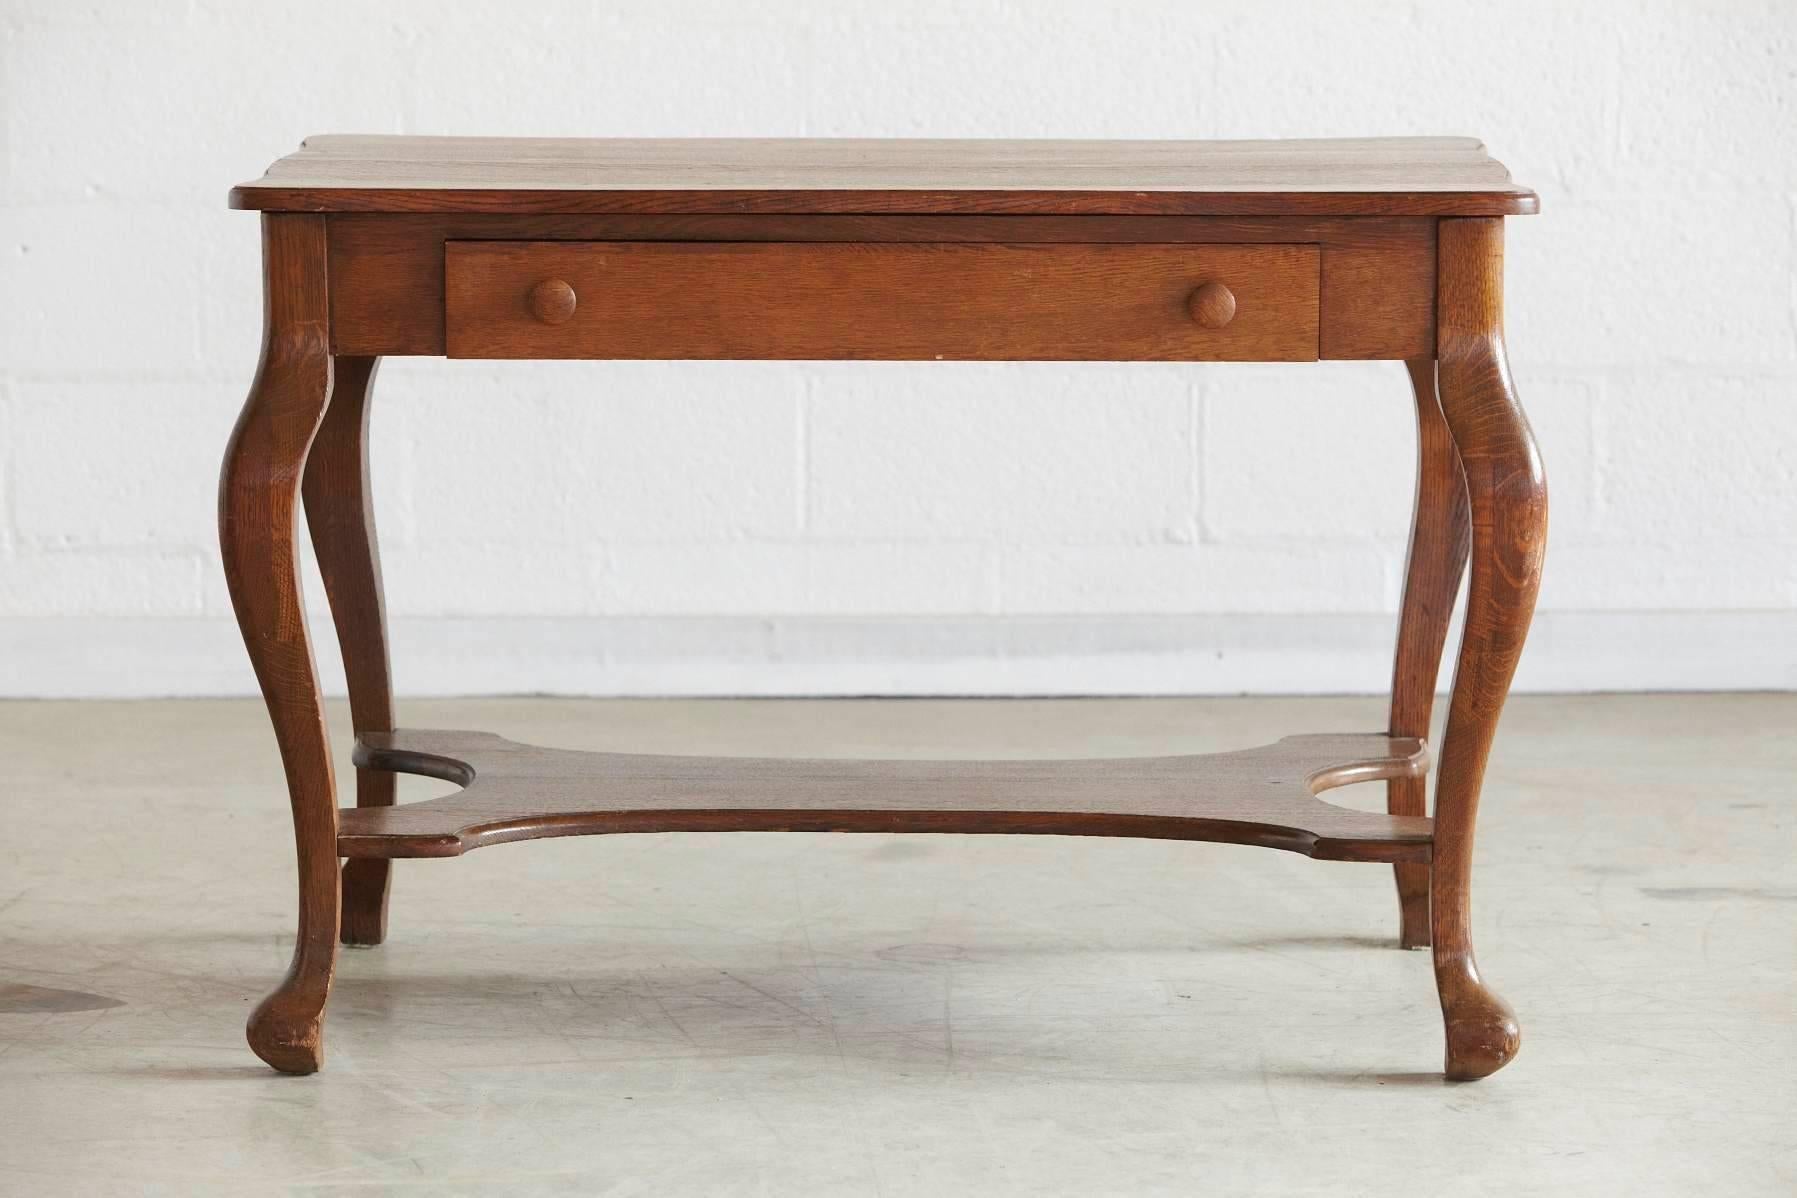 Beautiful solid antique oak quarter sawn library table with drawer by Larkin.
Sturdy construction, circa 1908. 
